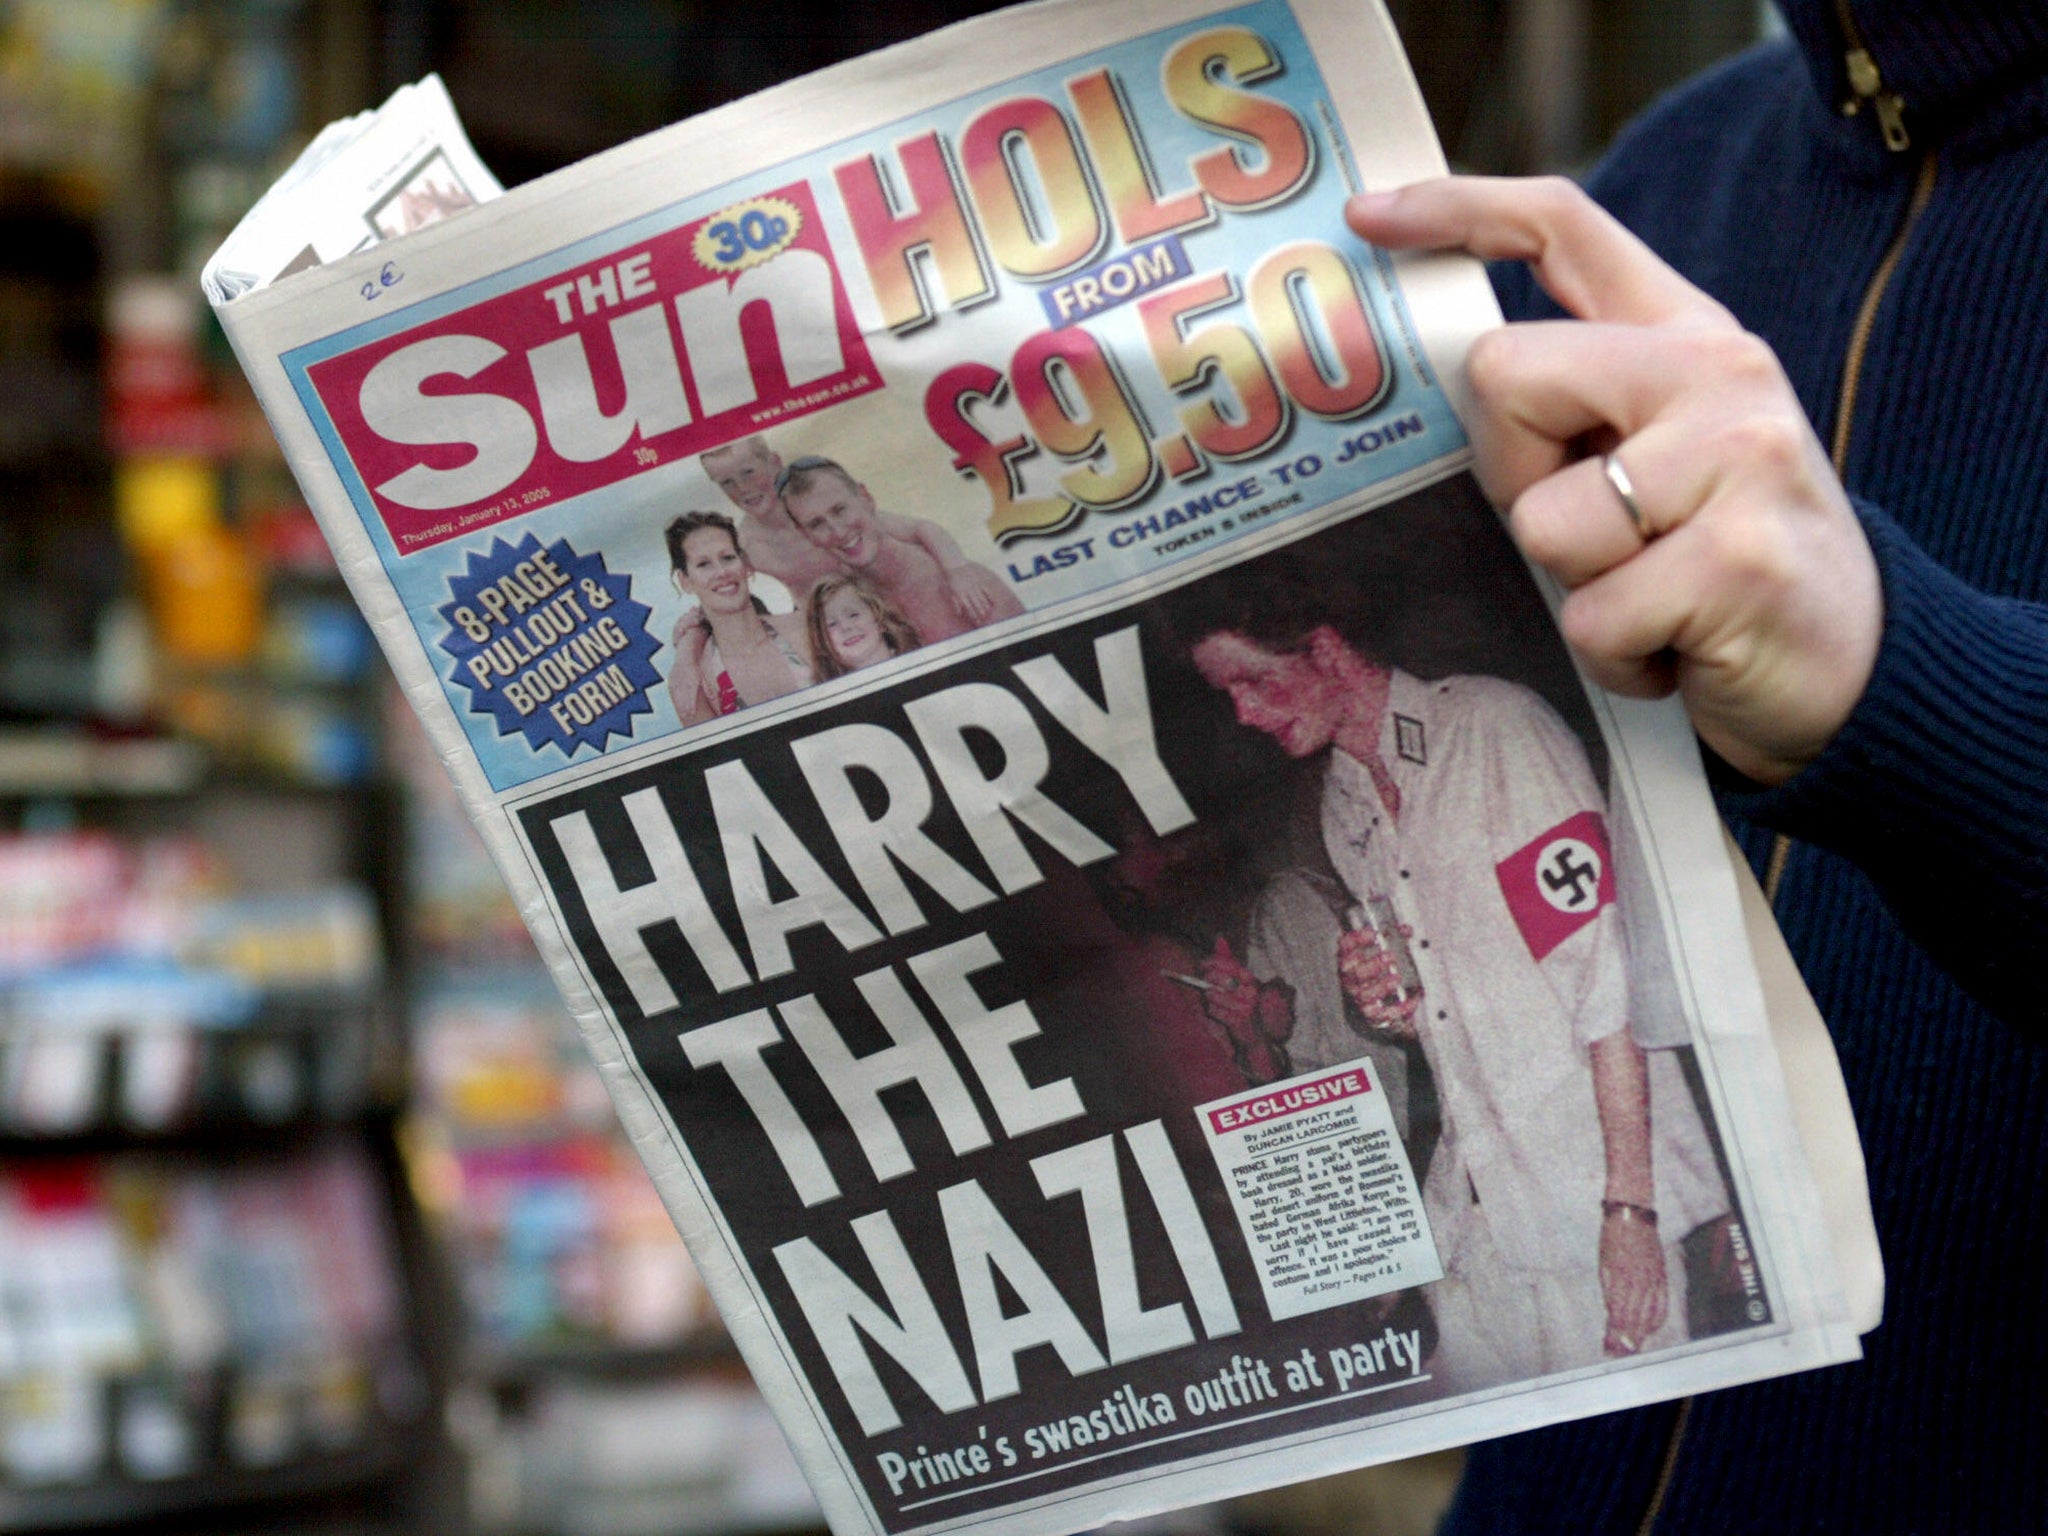 Harry made headlines 18 years ago with his fancy dress outfit